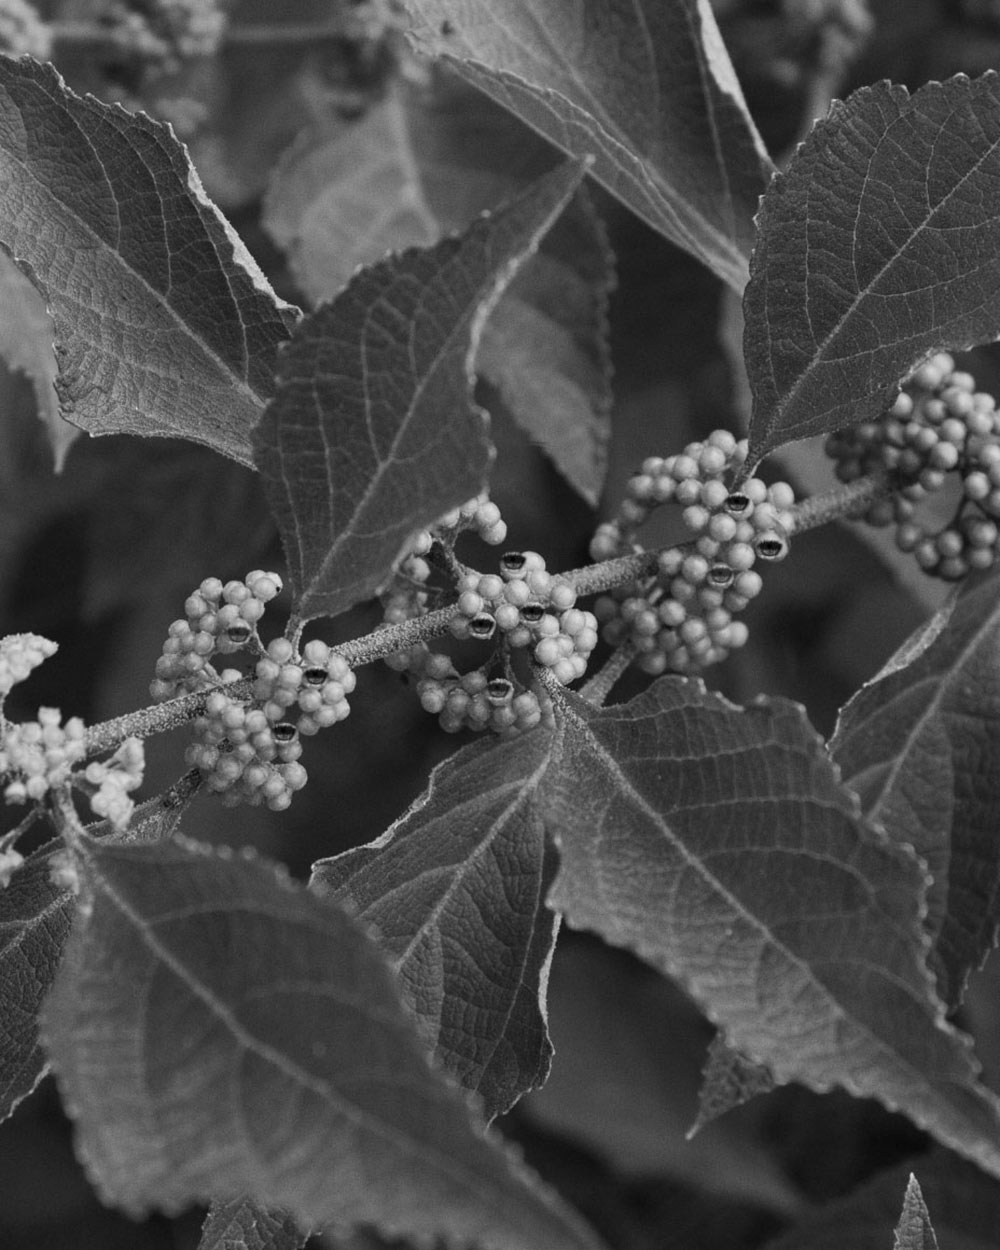 black and white photo by MSU photo student Kaneesha Handy of leaves with eyes in the buds